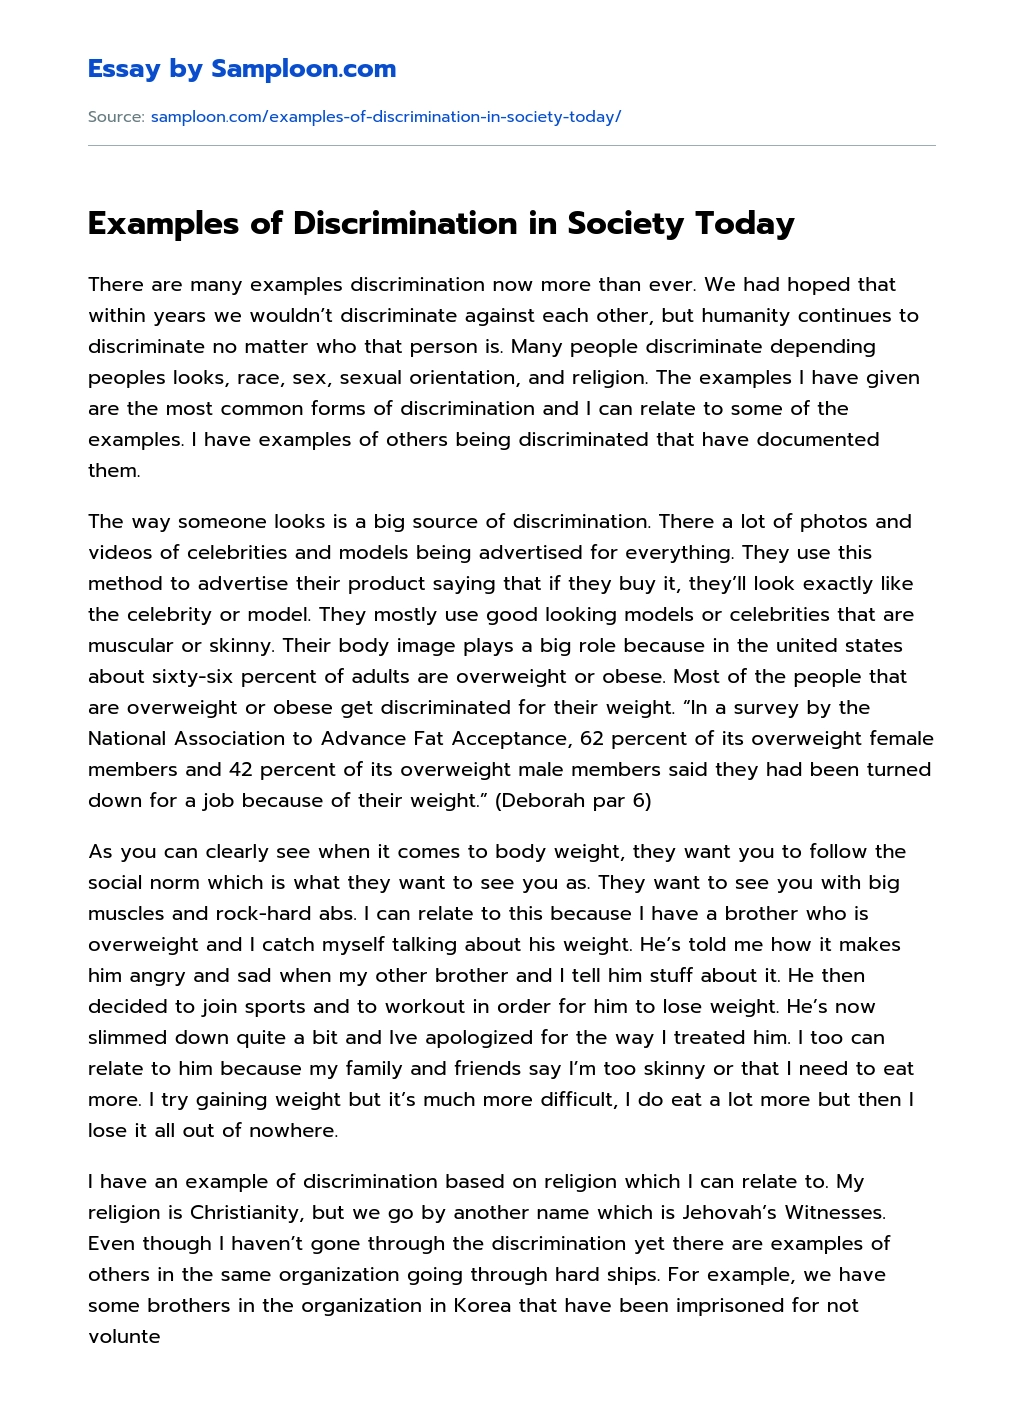 Examples of Discrimination in Society Today essay